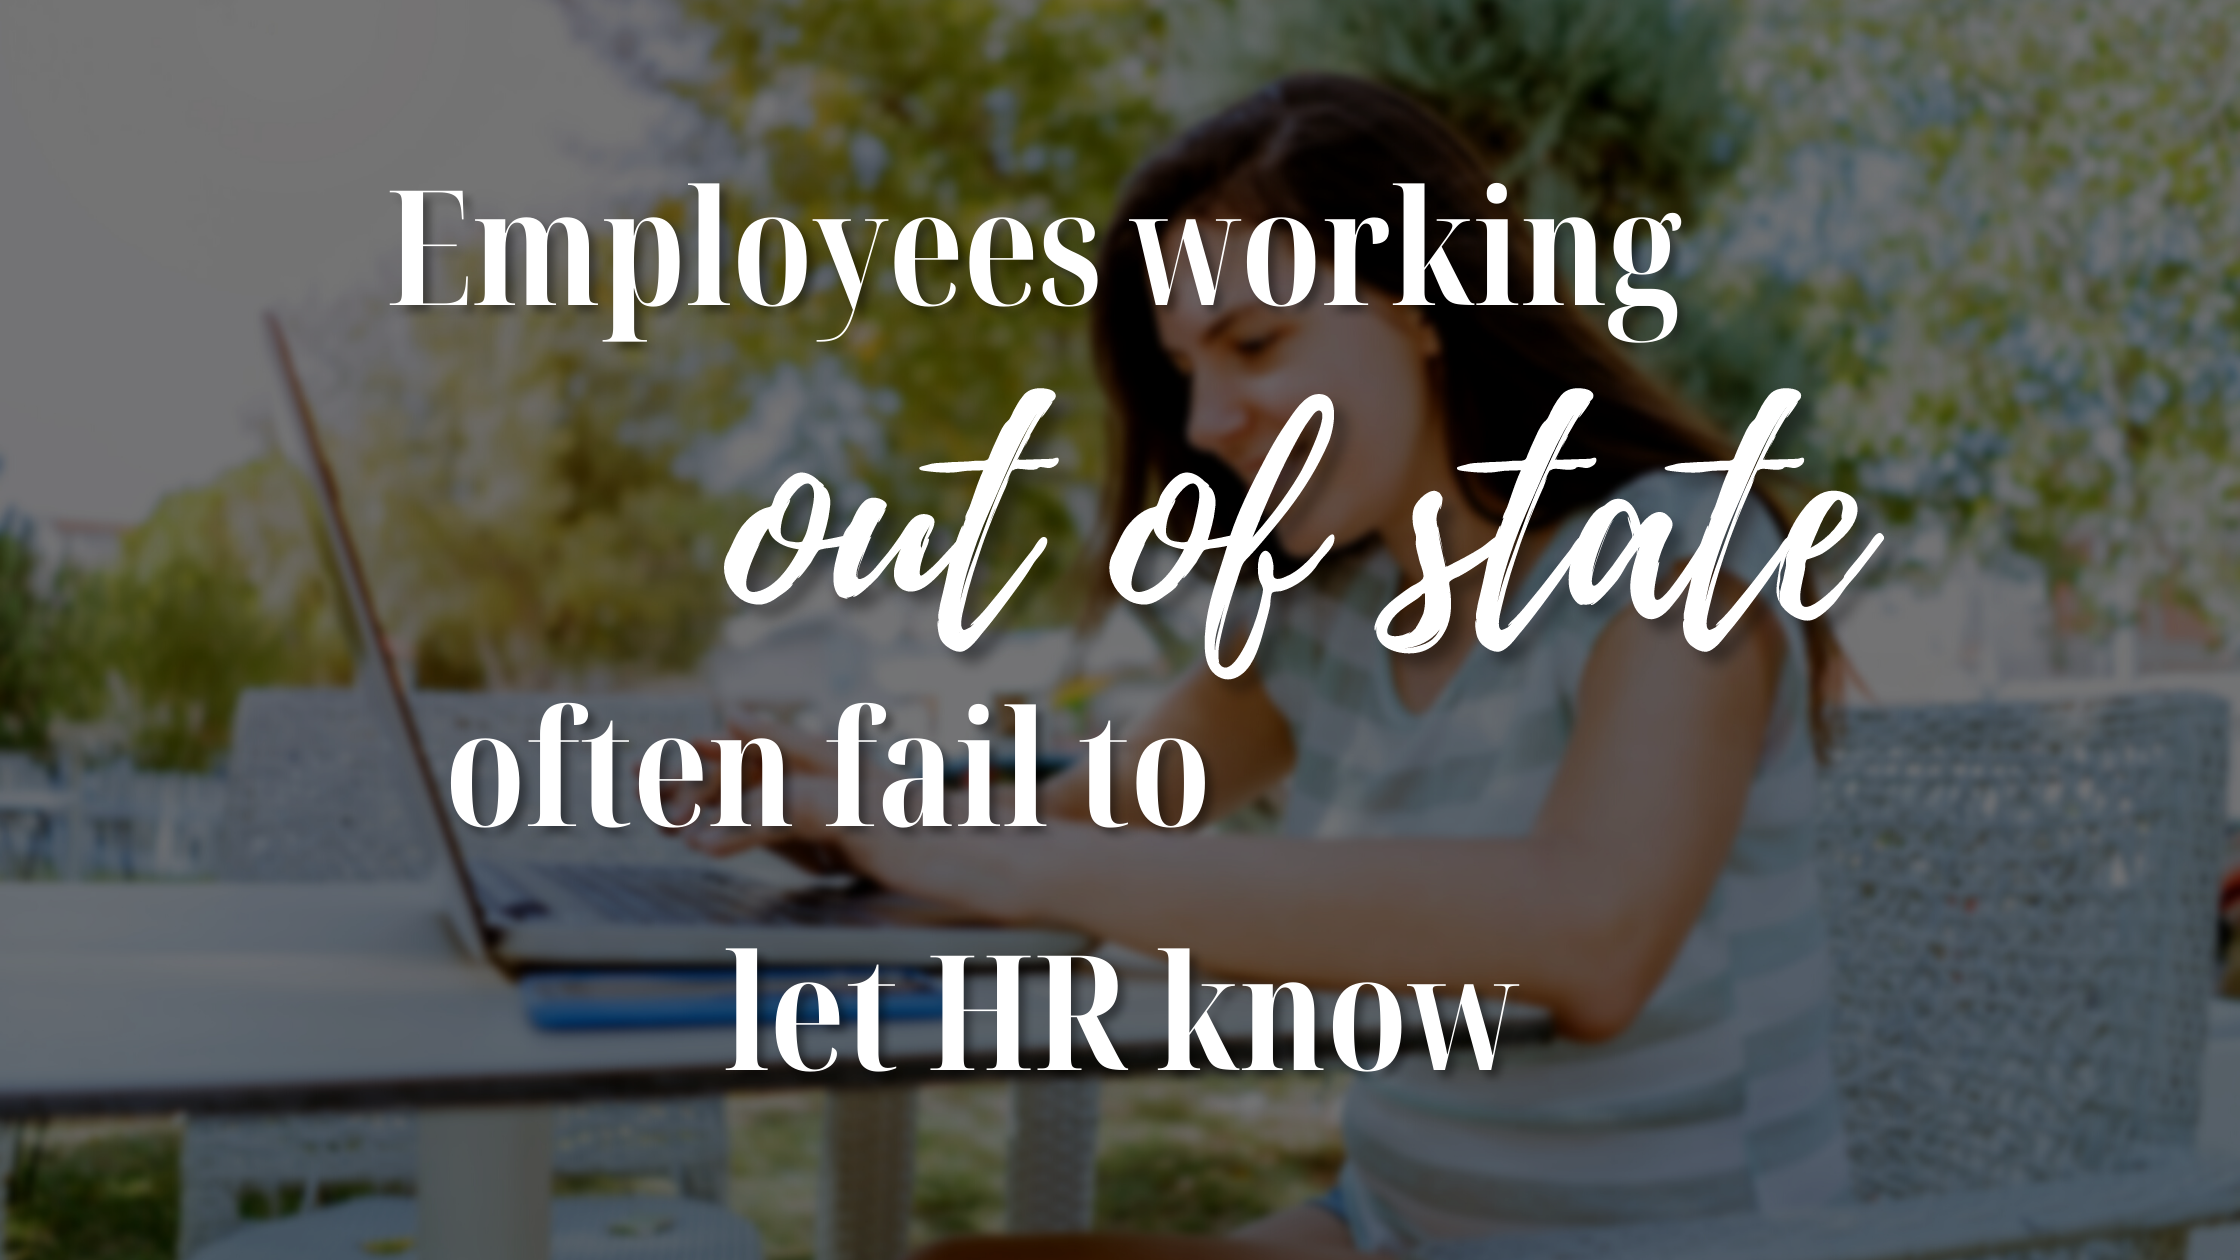 Employees Working Out of State Often Fail to Let HR Know